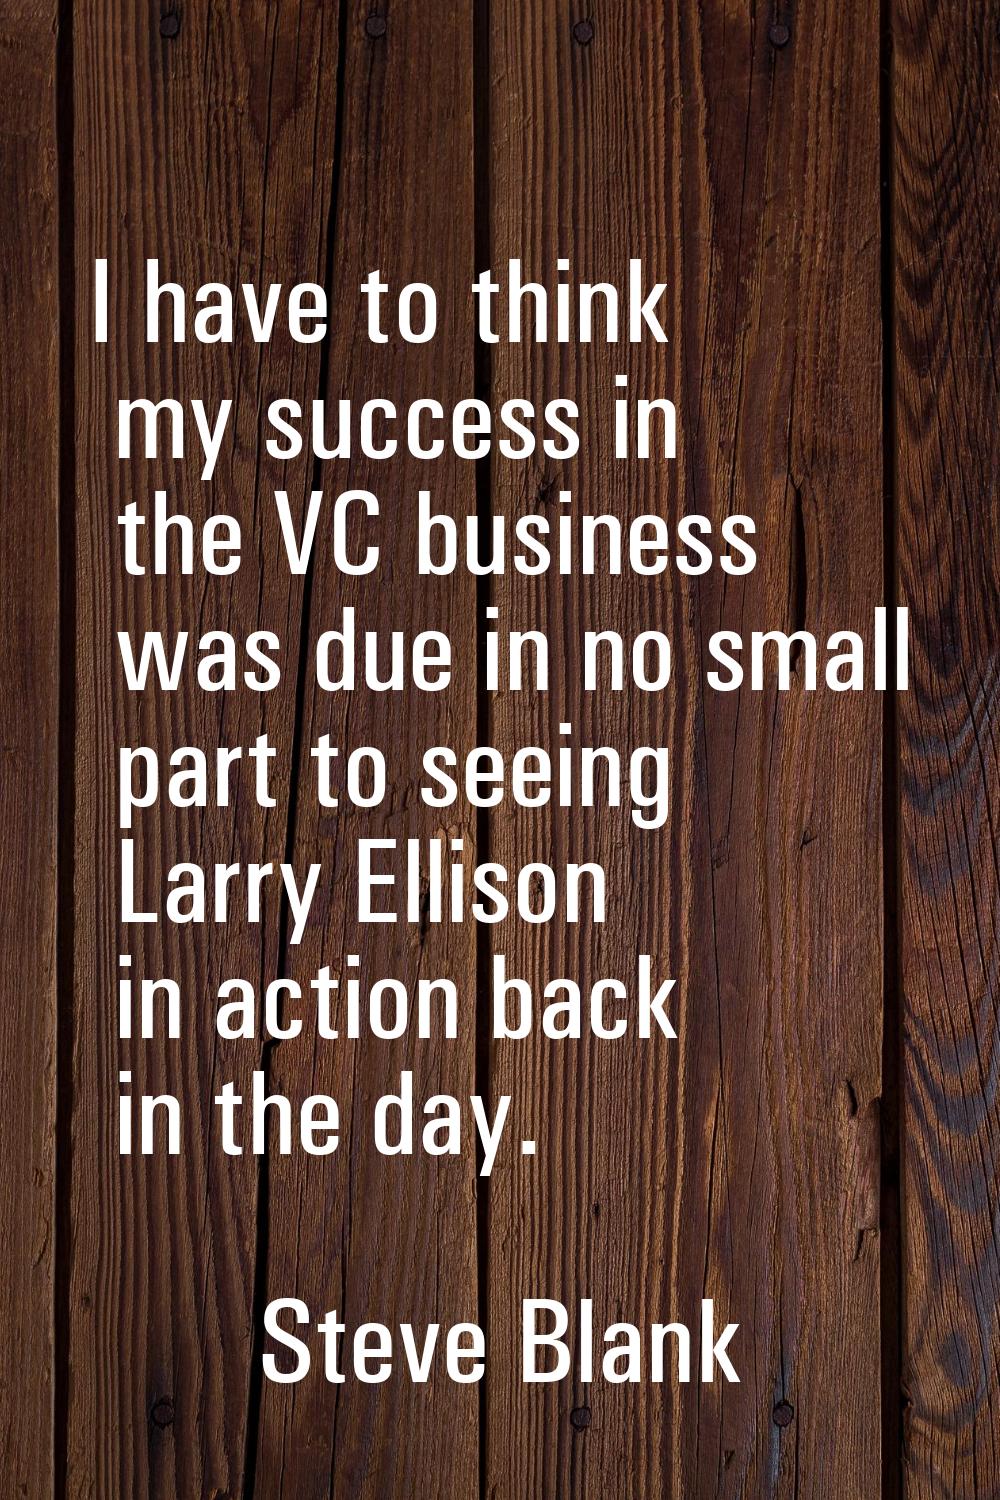 I have to think my success in the VC business was due in no small part to seeing Larry Ellison in a